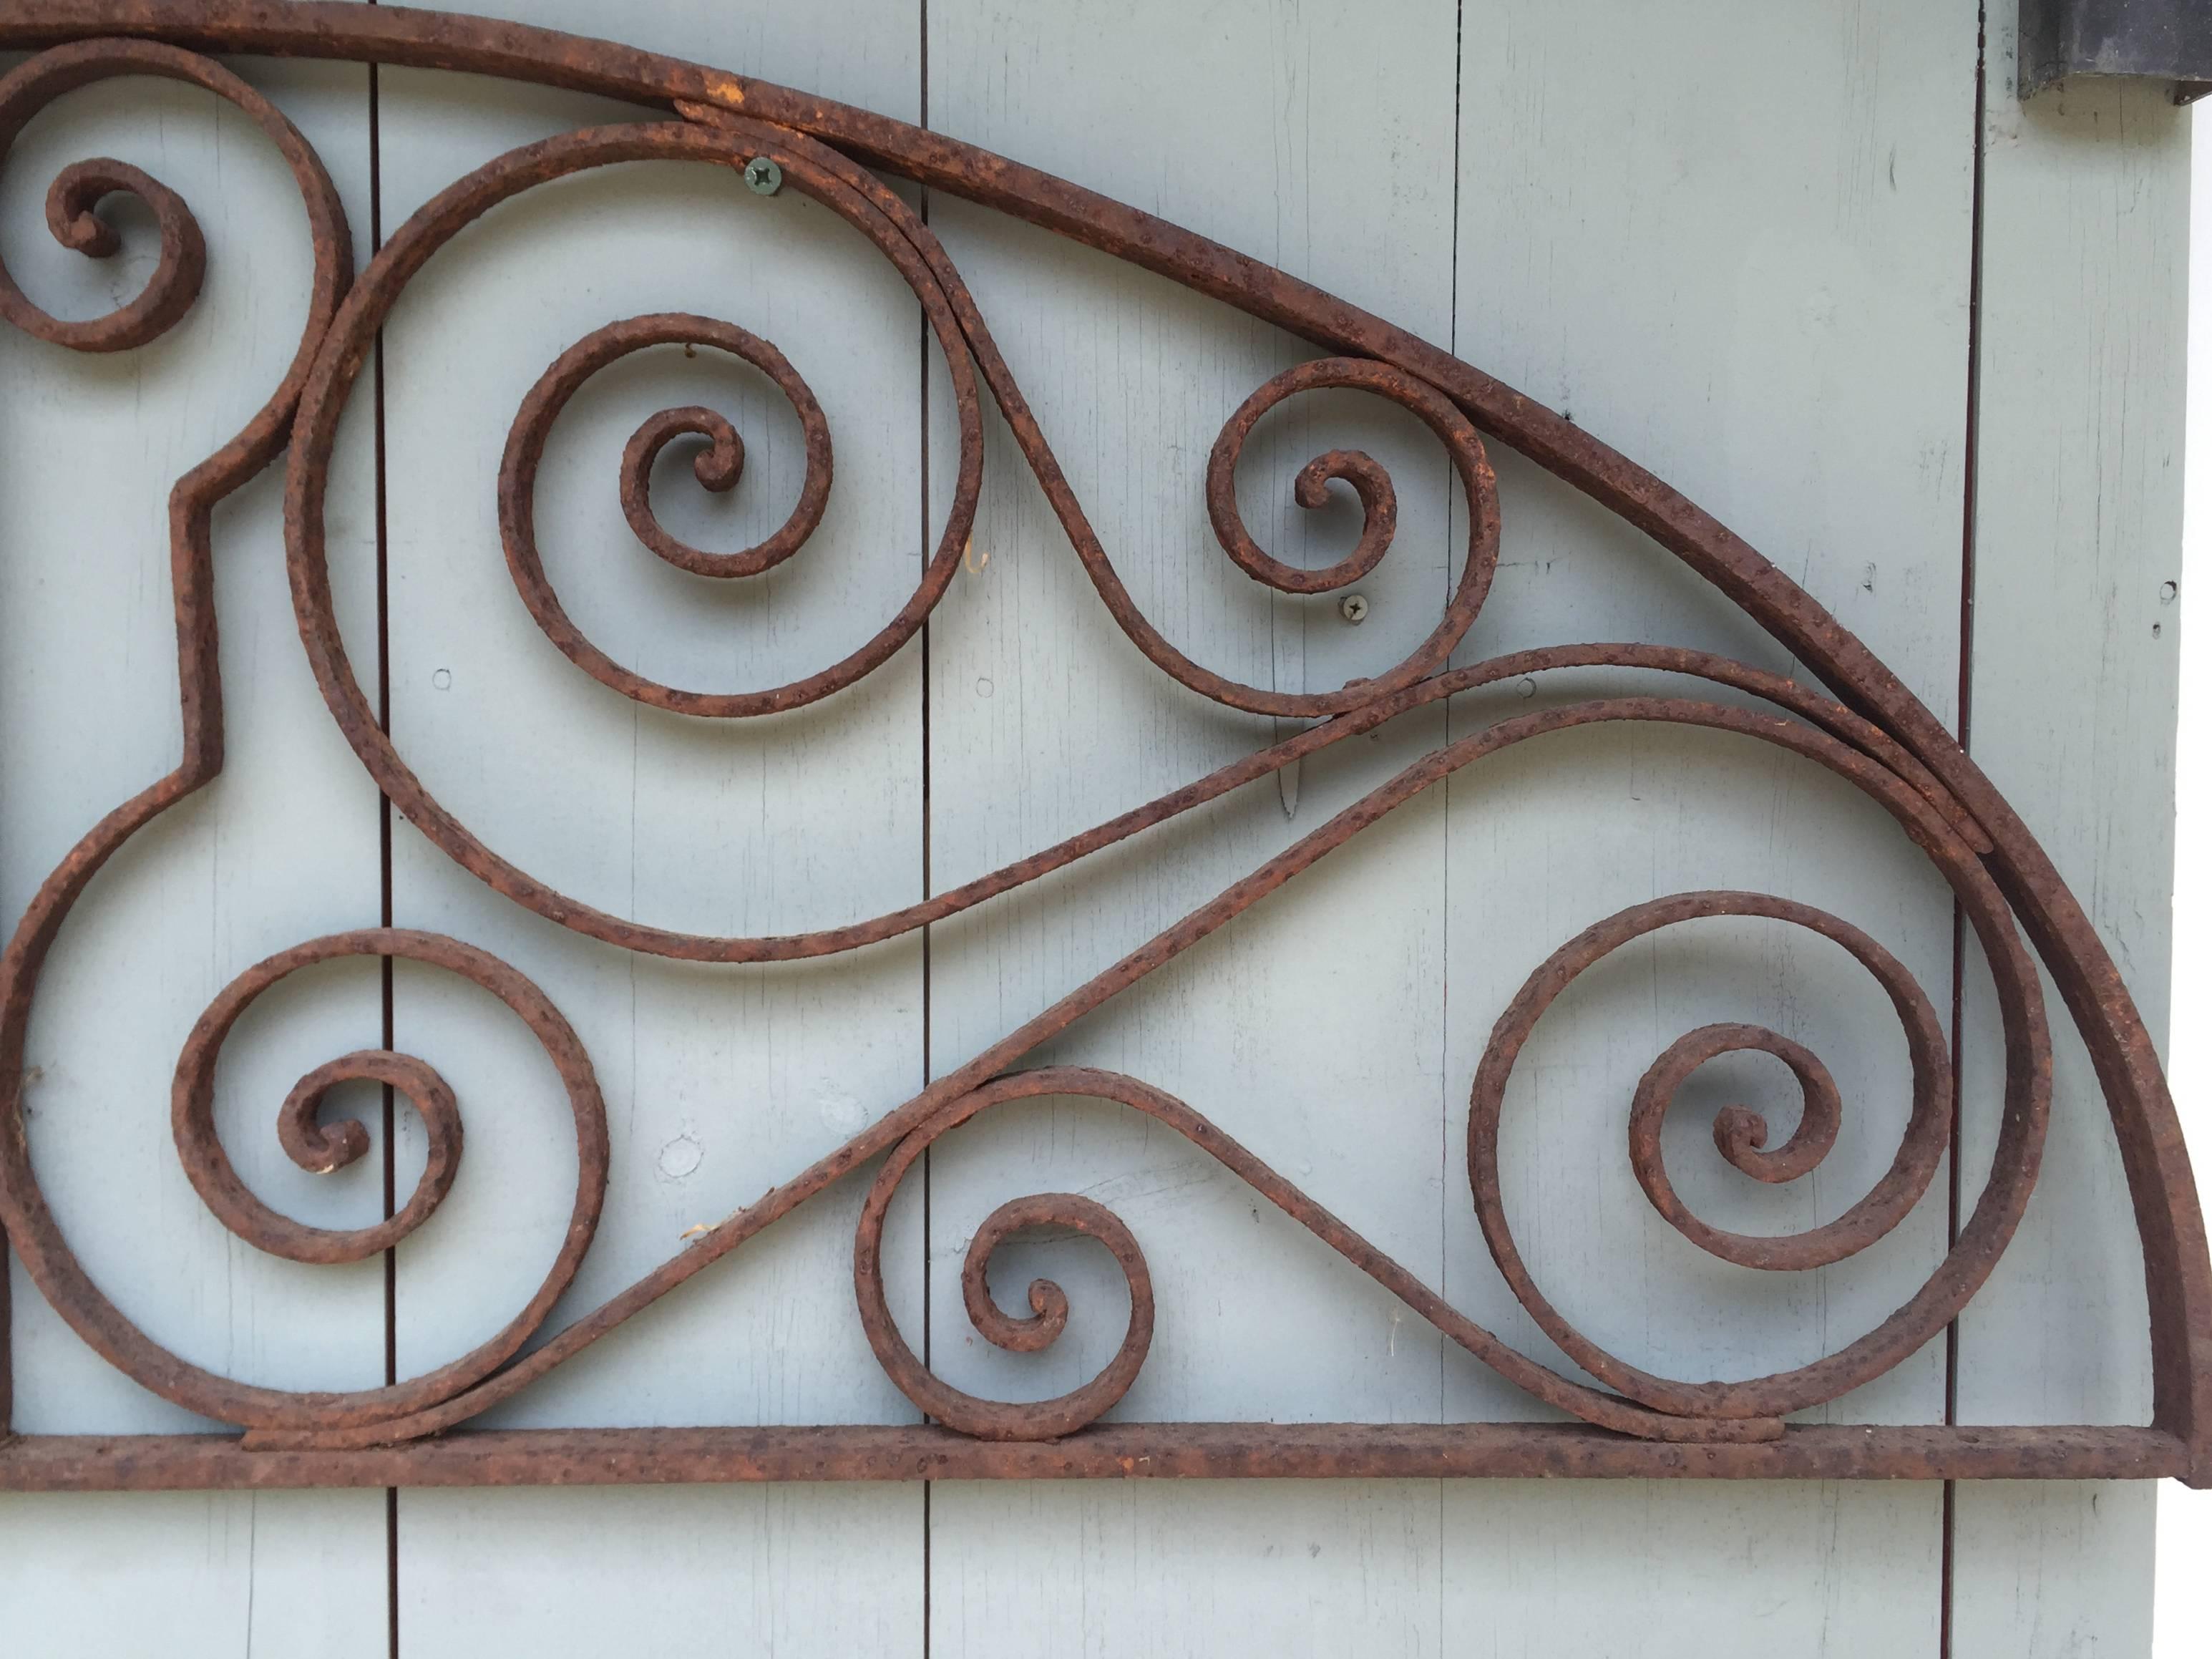 We think this large wrought iron demilune elliptical window grate in two parts actually served as a door overlight to a courtyard in Egypt or Morocco. Both were French colonies, and although the work is beautifully-done, it doesn’t quite have that